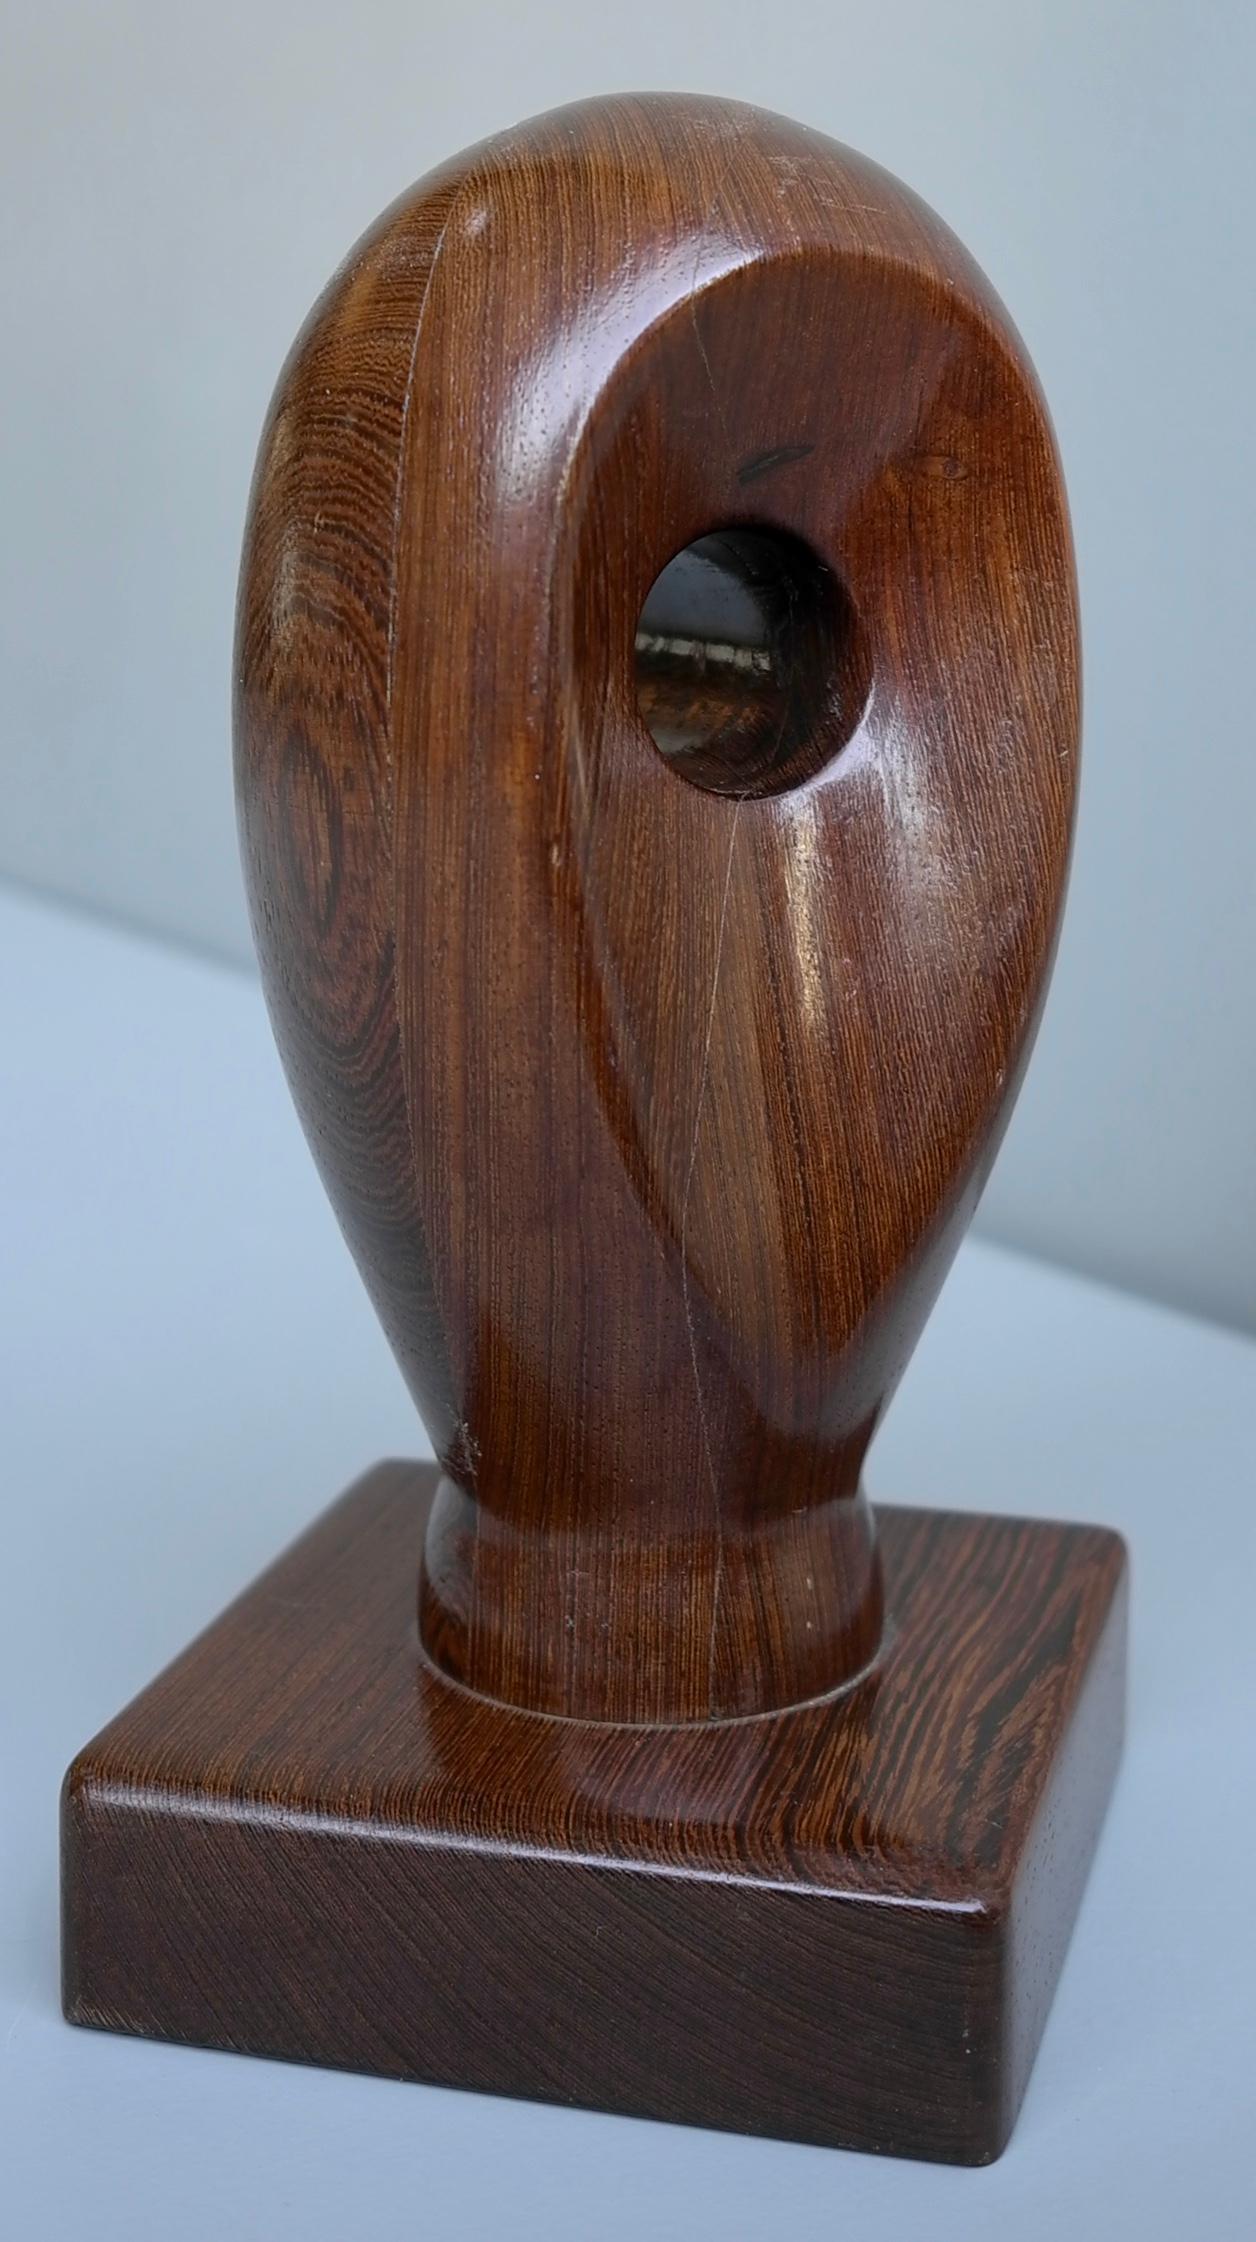 Solid Wengé Wooden Organic Abstract Table Sculpture by Dolf Breetvelt, 1960s In Good Condition For Sale In Den Haag, NL